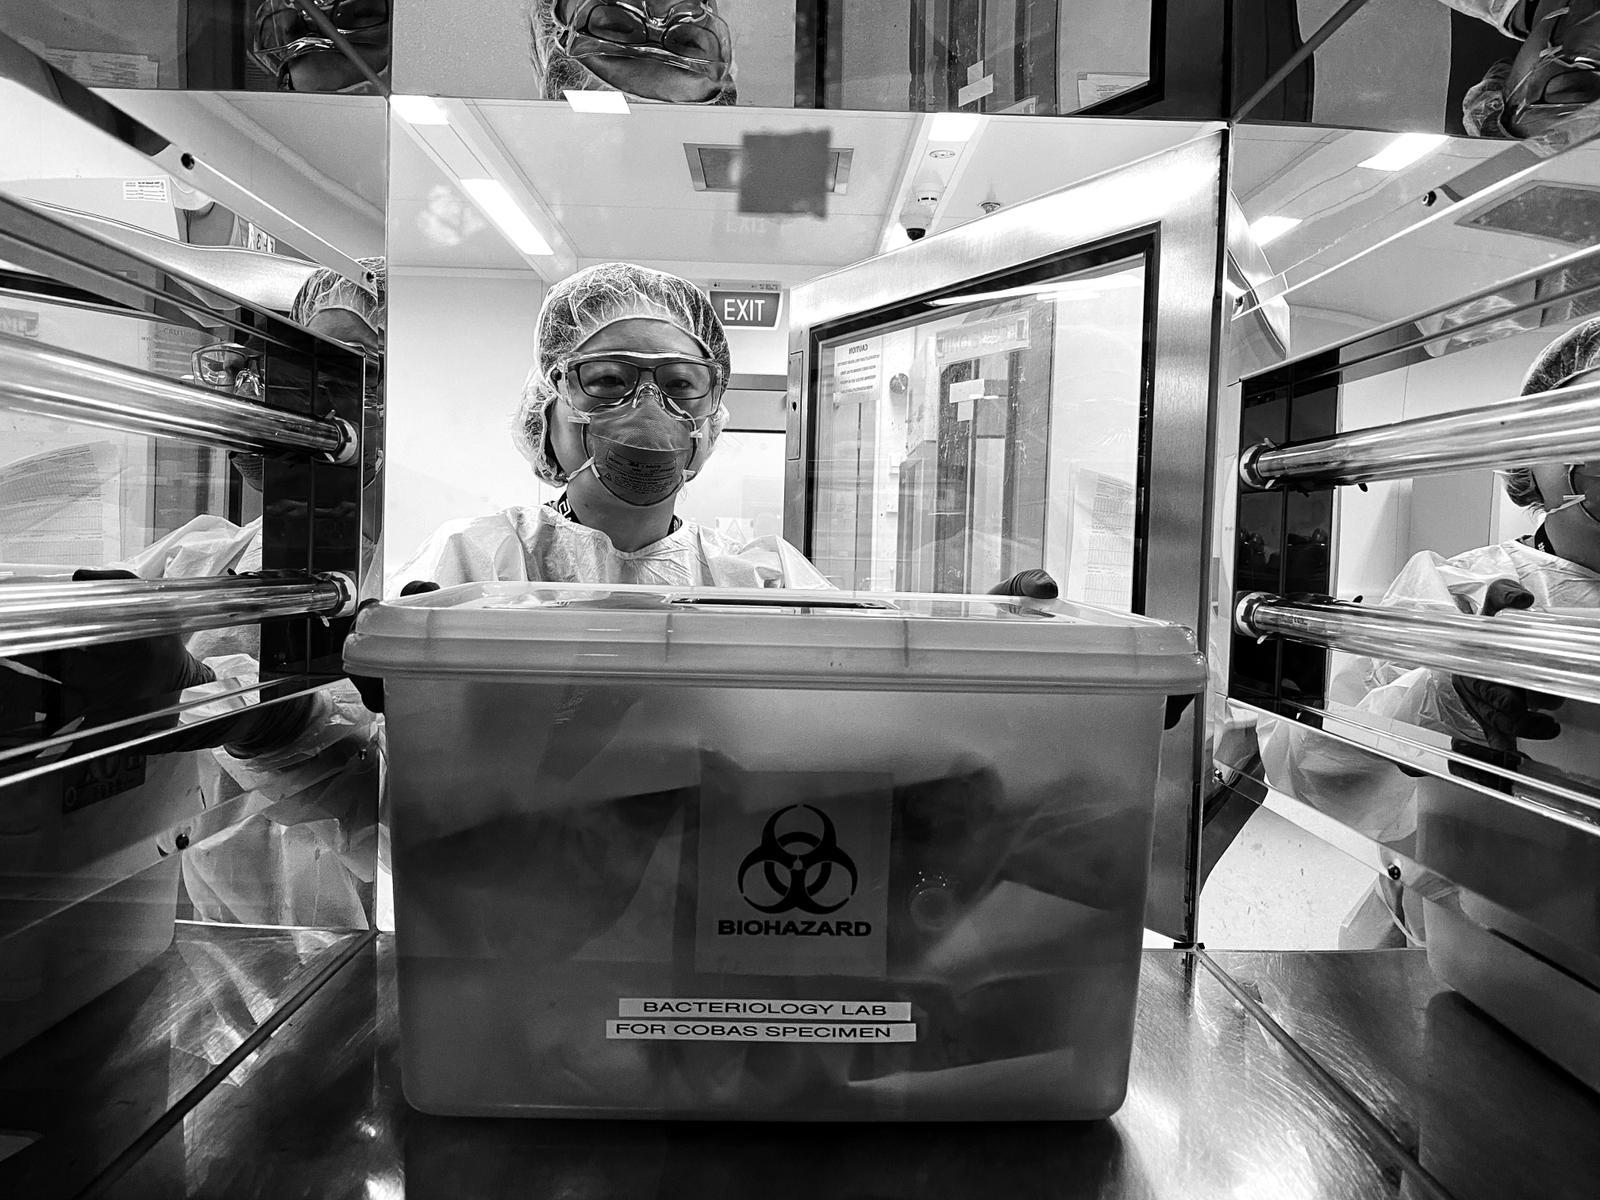 Dr Karrie Ko at work during the height of the pandemic in 2020 // Credit: Koh Tse Hsien